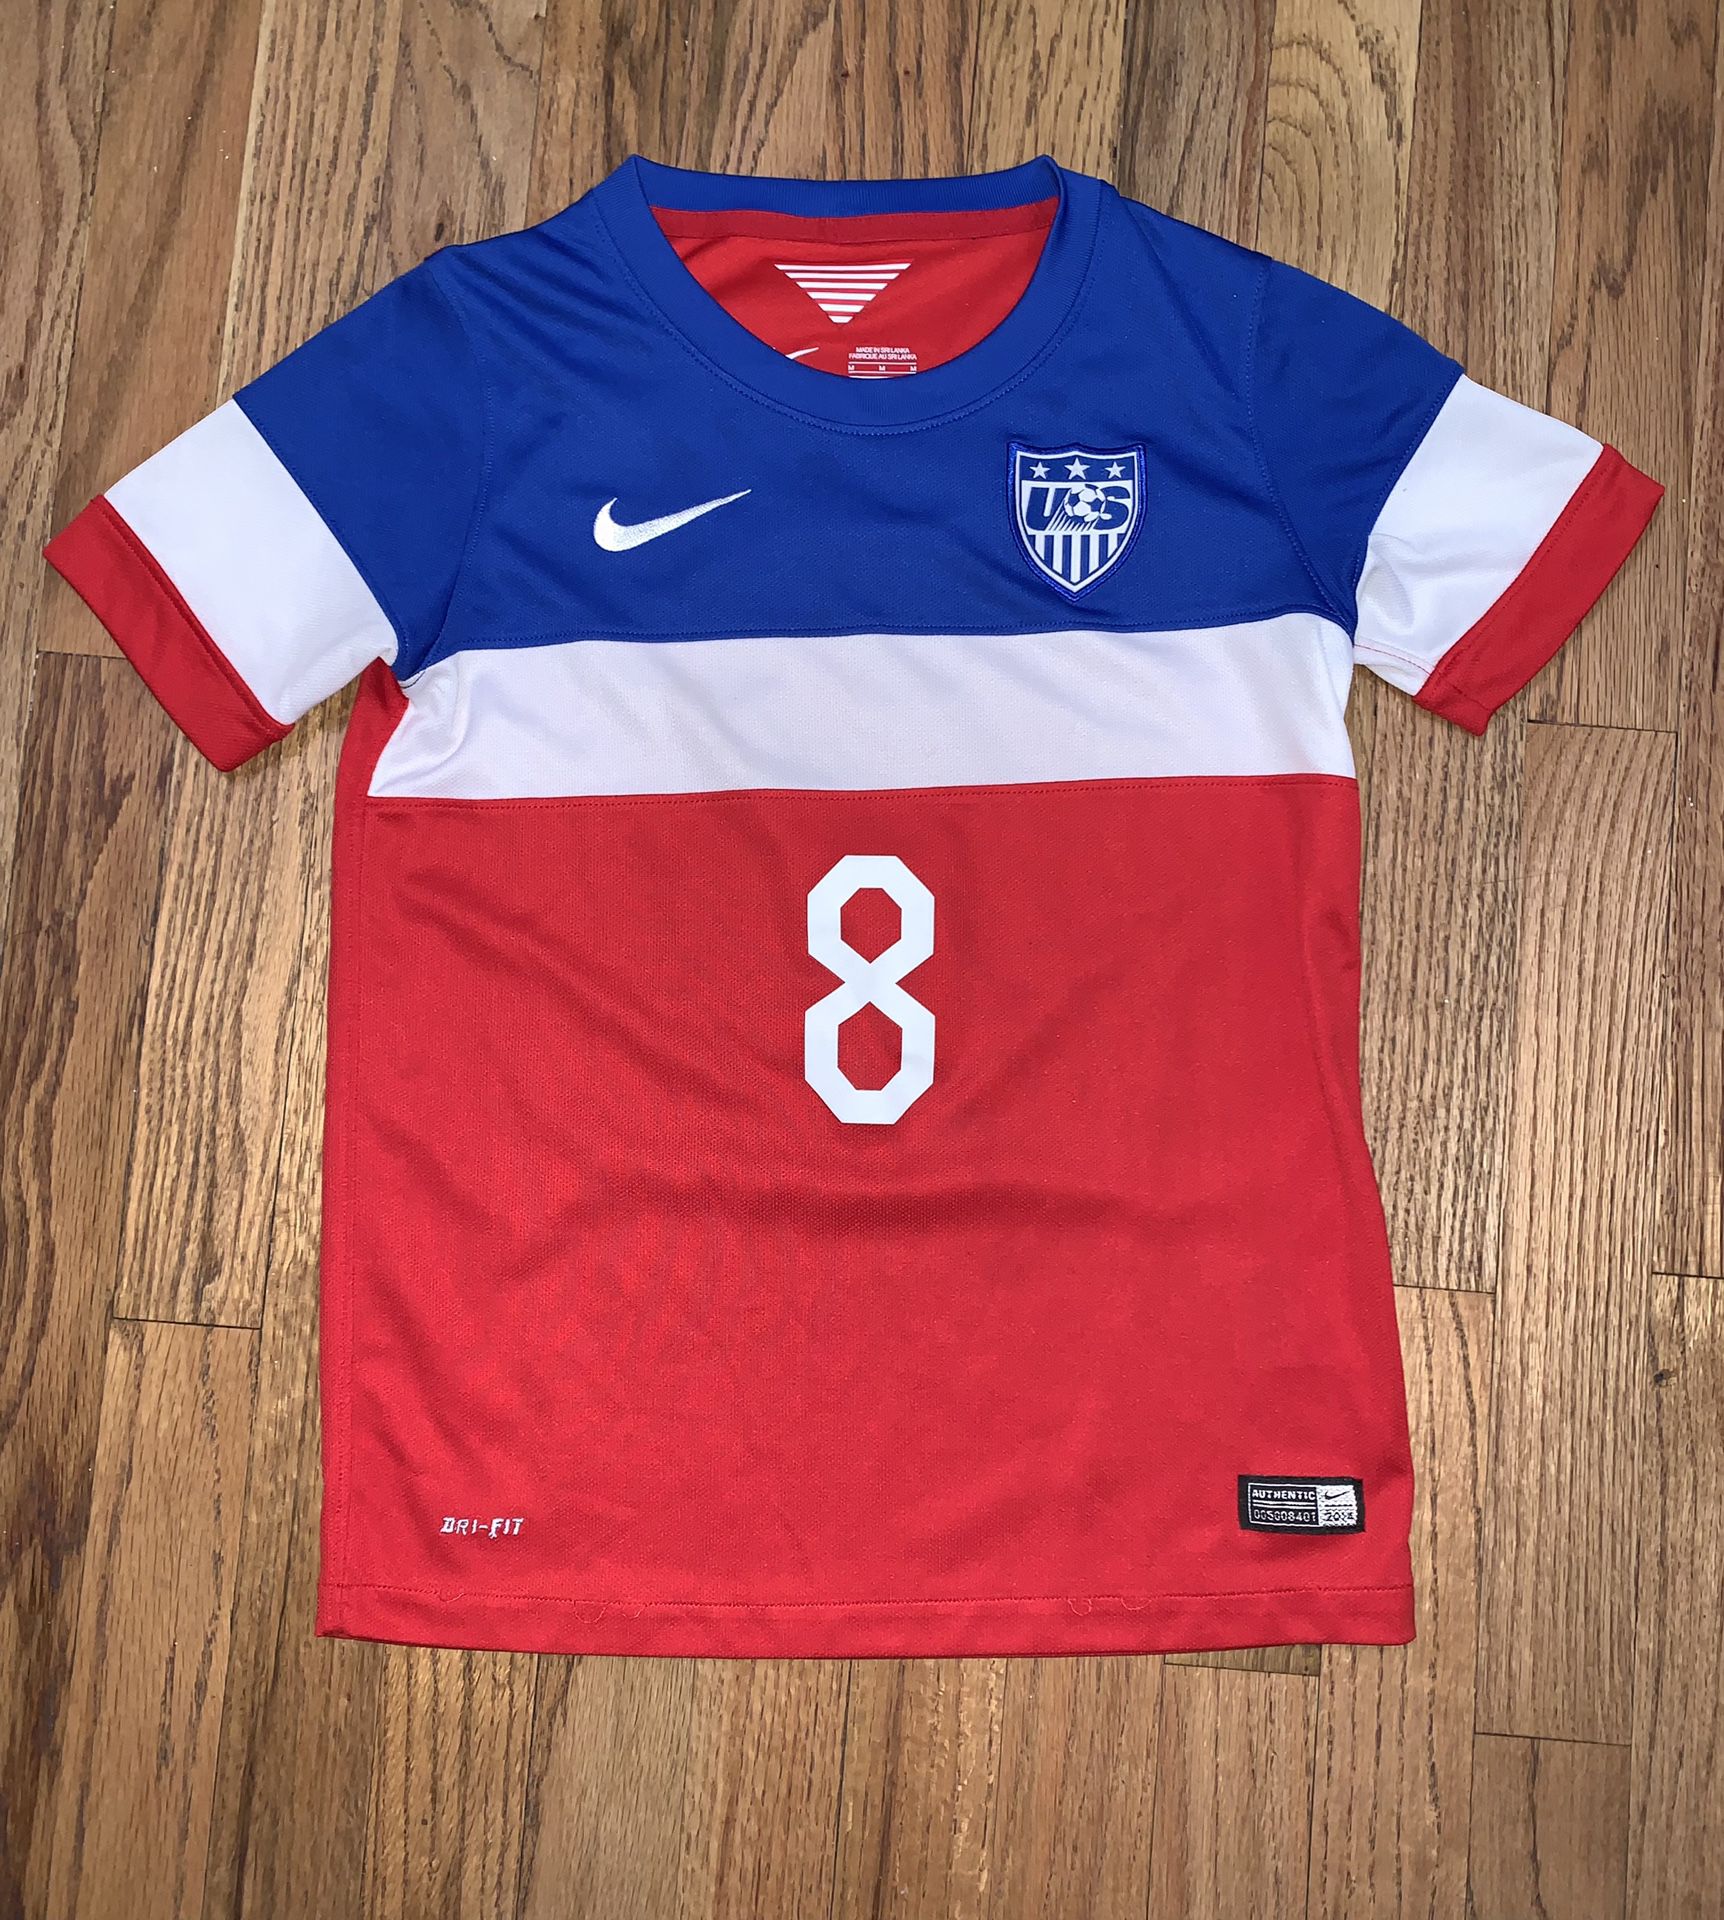 VERY RARE USMNT USA Soccer Clint Dempsey Jersey - Youth Bomb Pop, 2014 Nike for Sale Los Angeles, CA - OfferUp